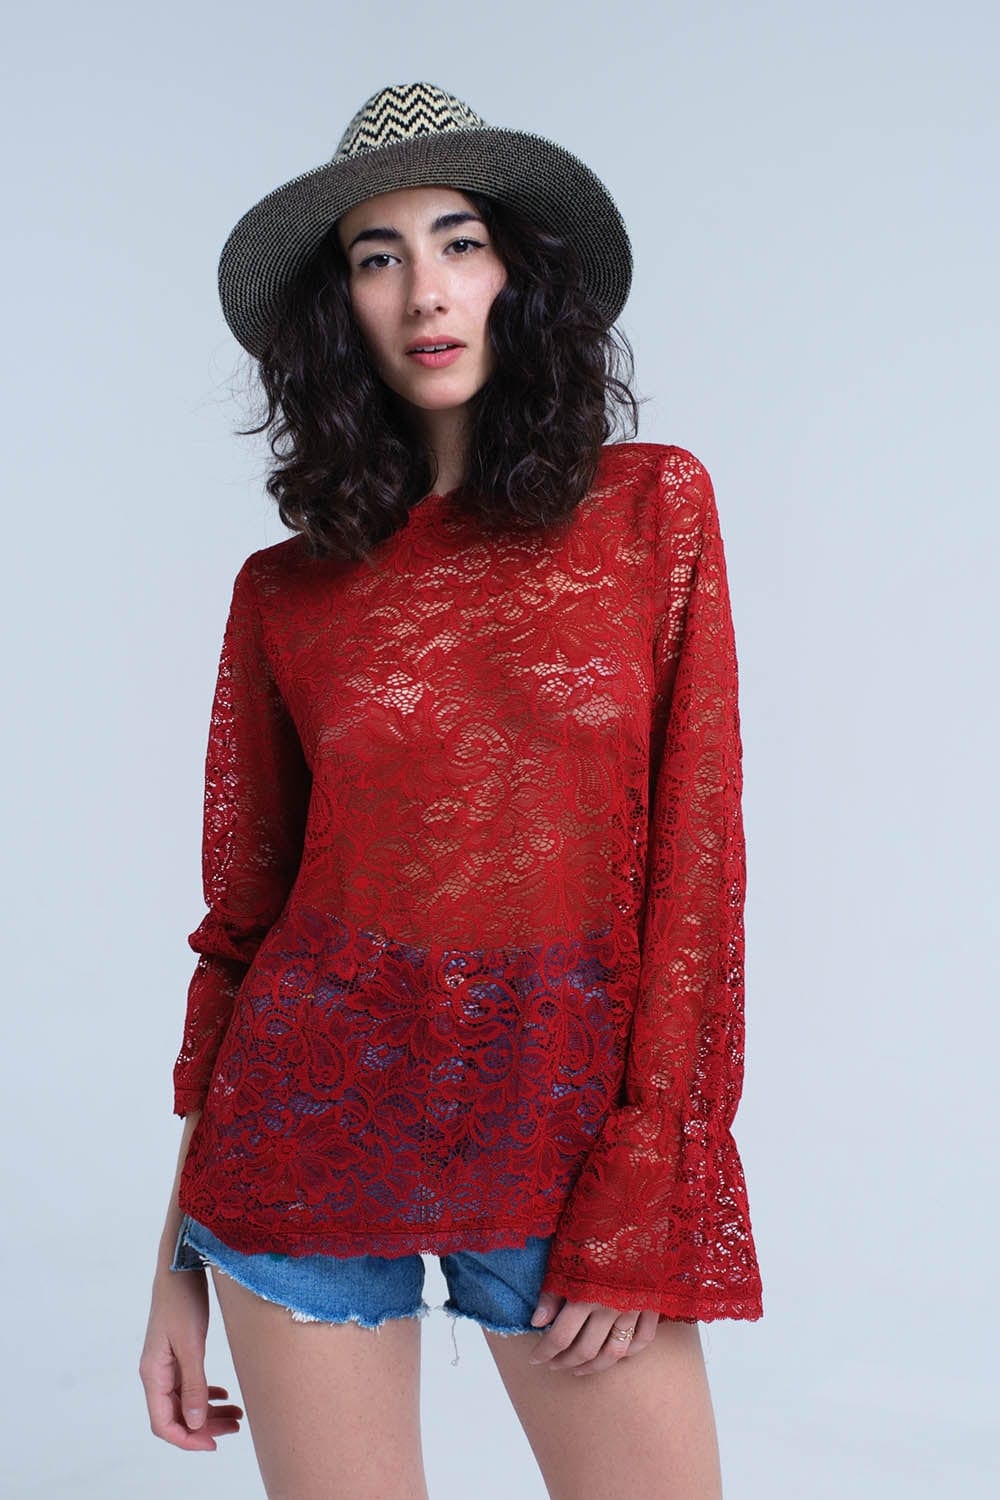 Q2 Women's Blouse Burgundy sheer lace top with bell sleeves